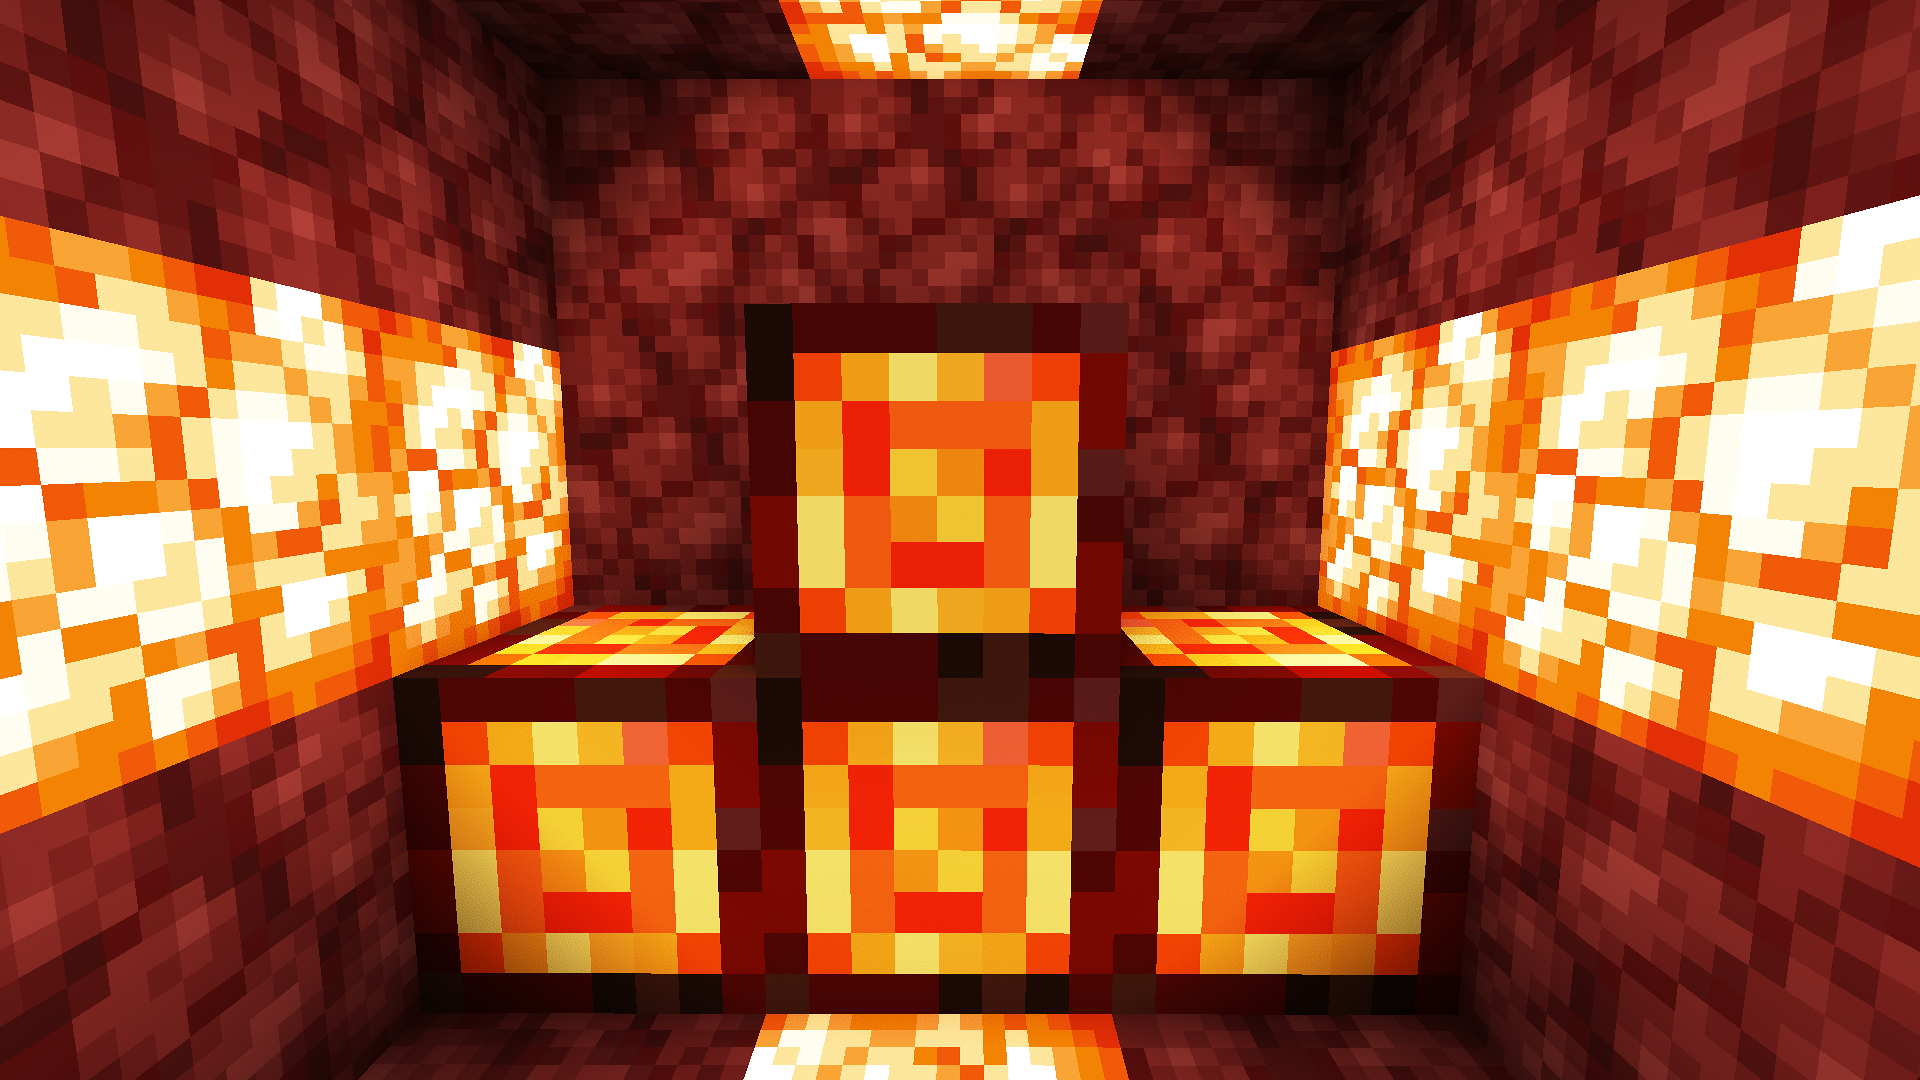 Nether block (with shaders)